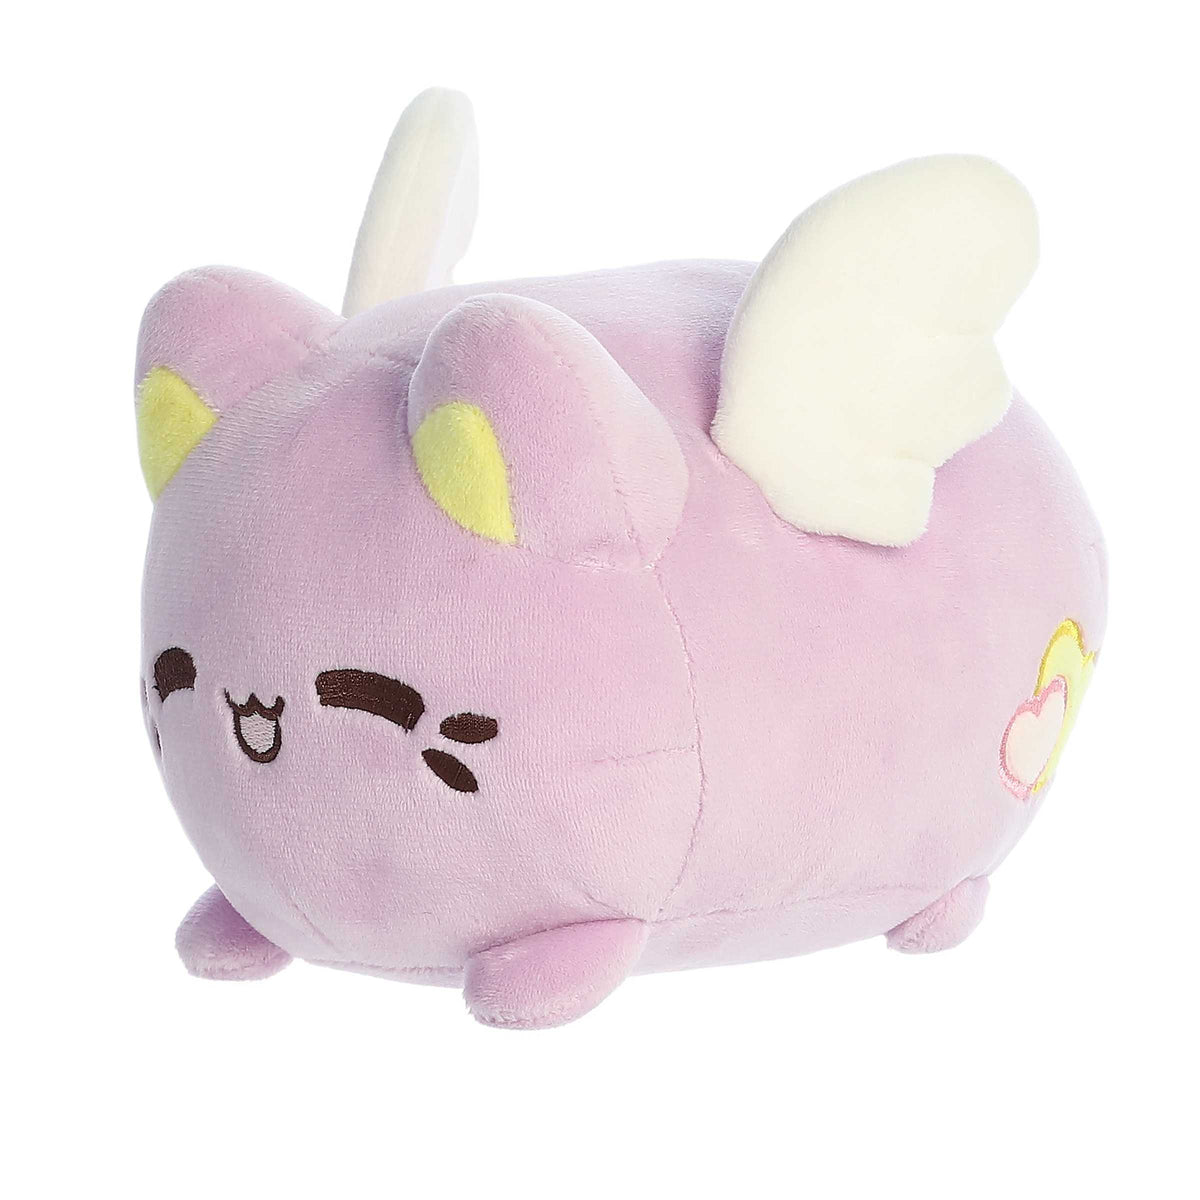 Lavender Candy Heart Meowchi with white wings, yellow ear accents. Soft purple plush from Tasty Peach Valentine plushies